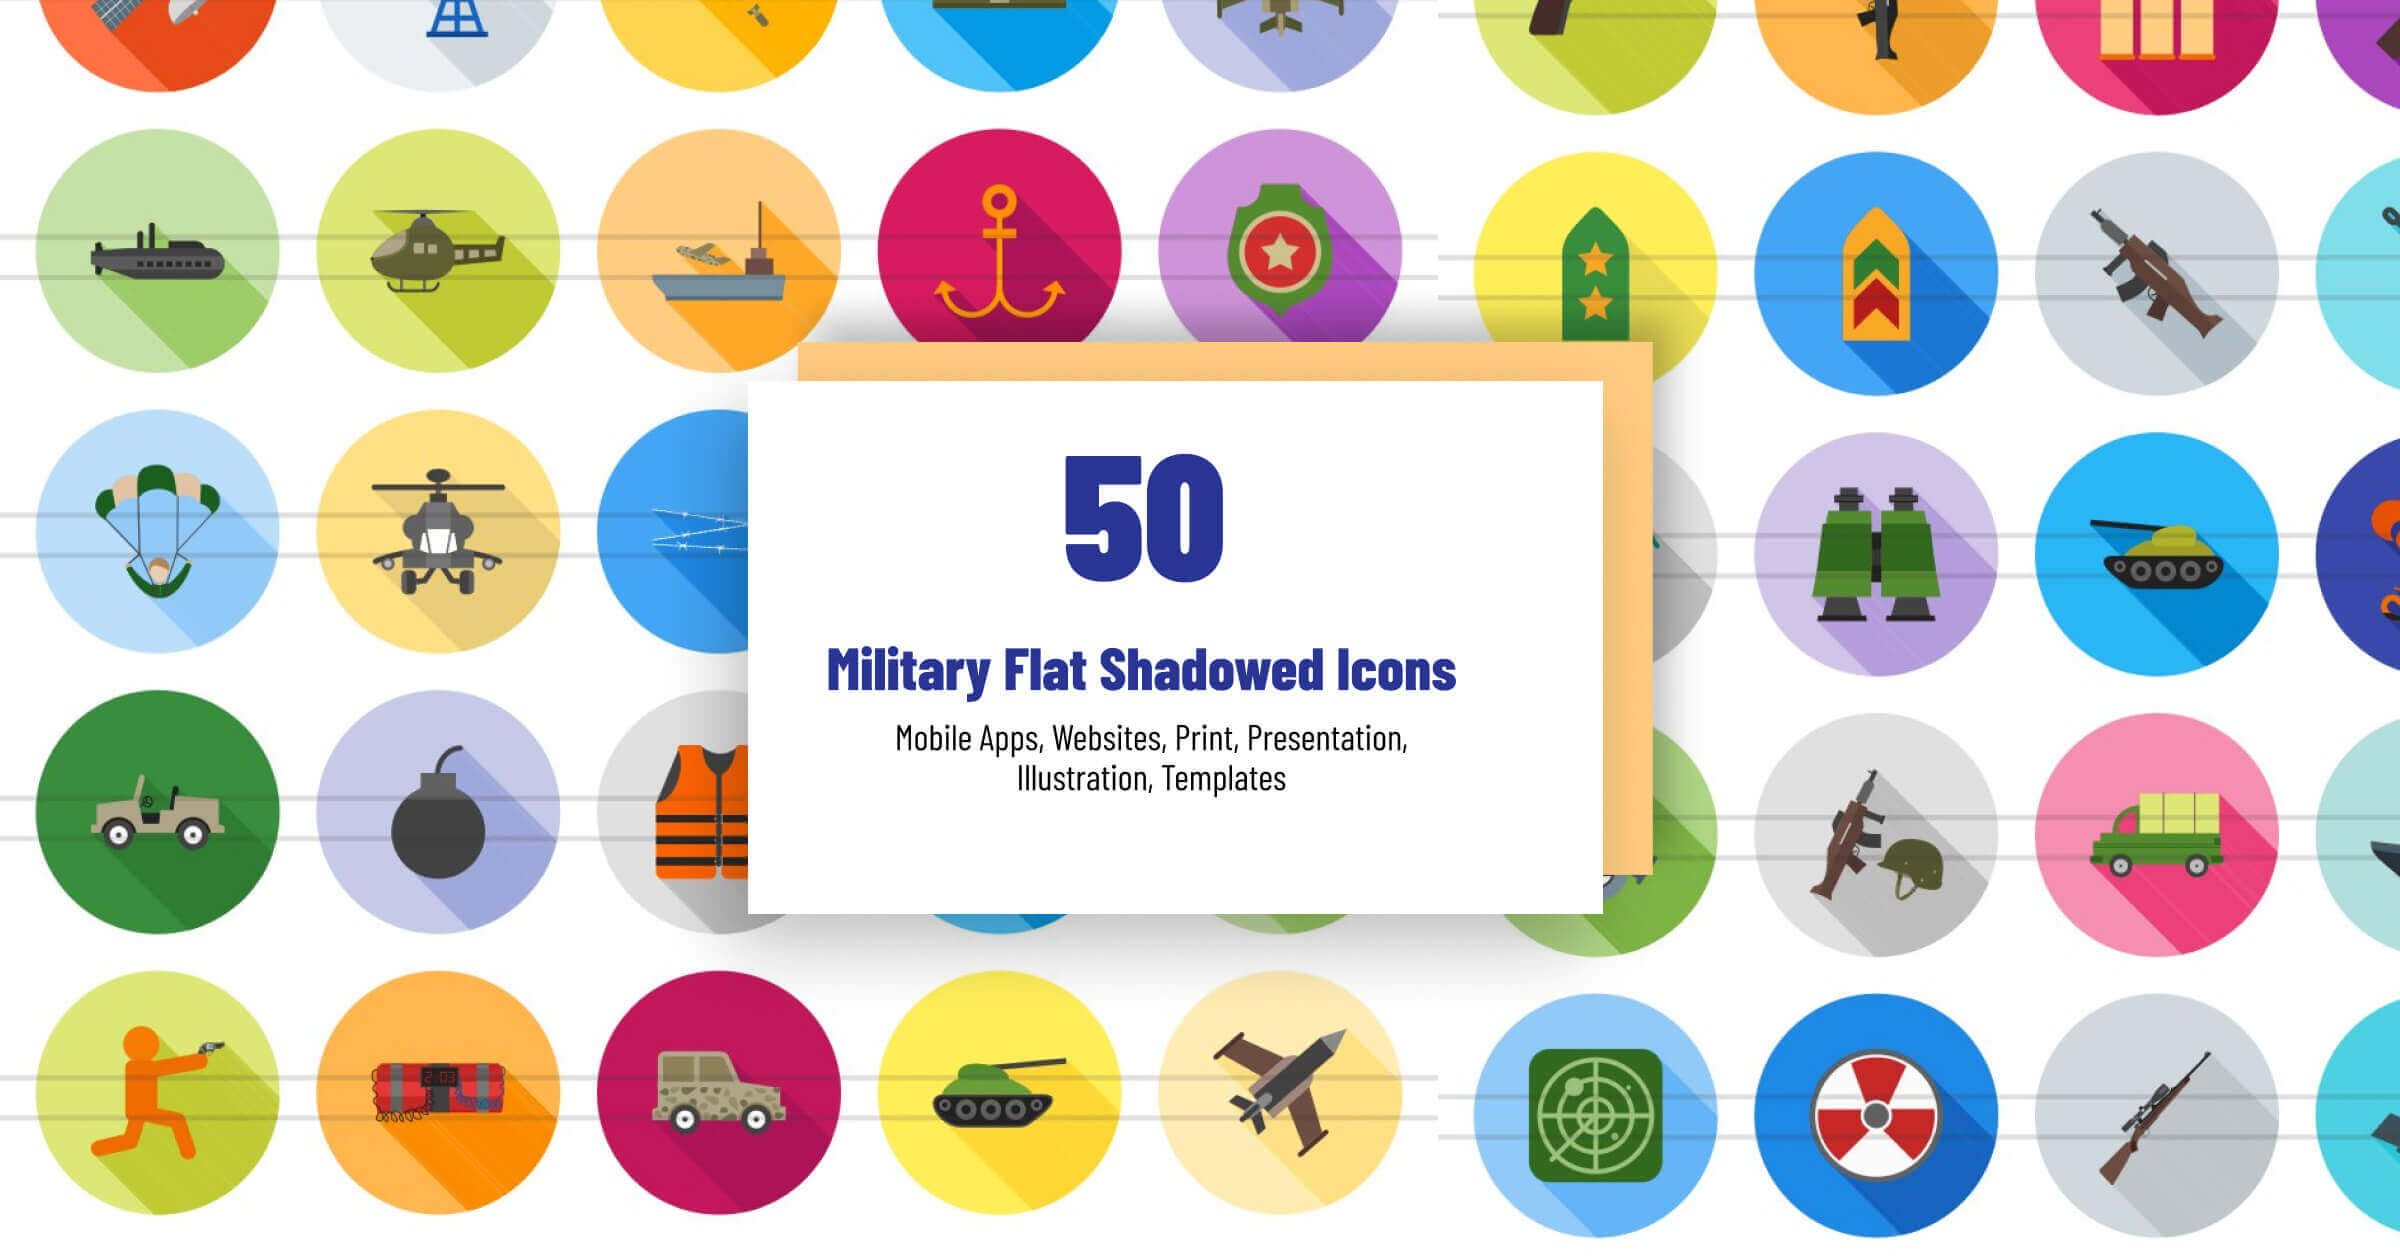 Multicolored backgrounds depicting military objects.